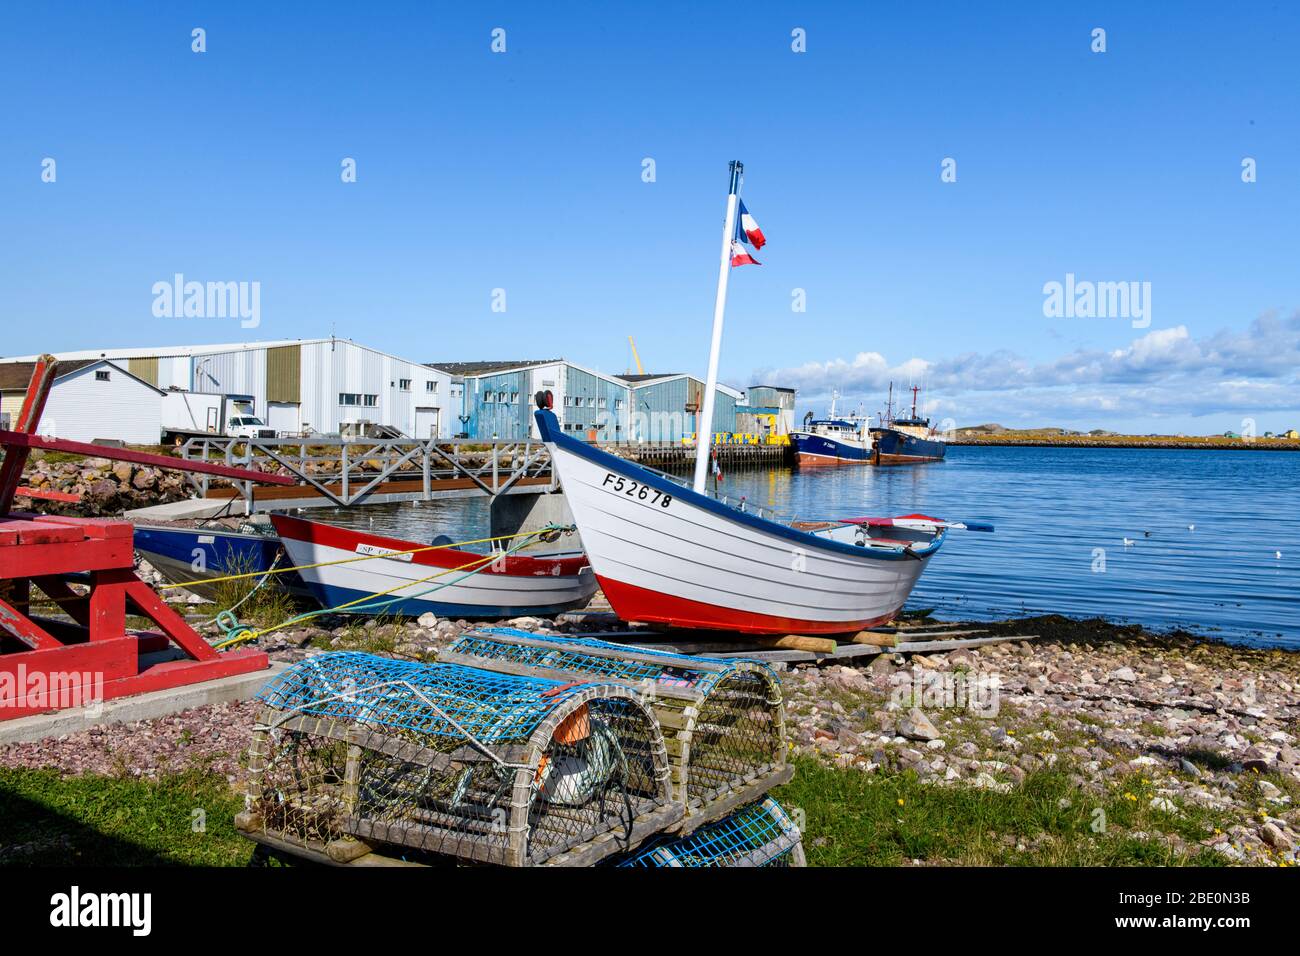 New France, St-PIerre et Miquelon, Canadian Maritimes. Fishing boat on the harbor. Stock Photo